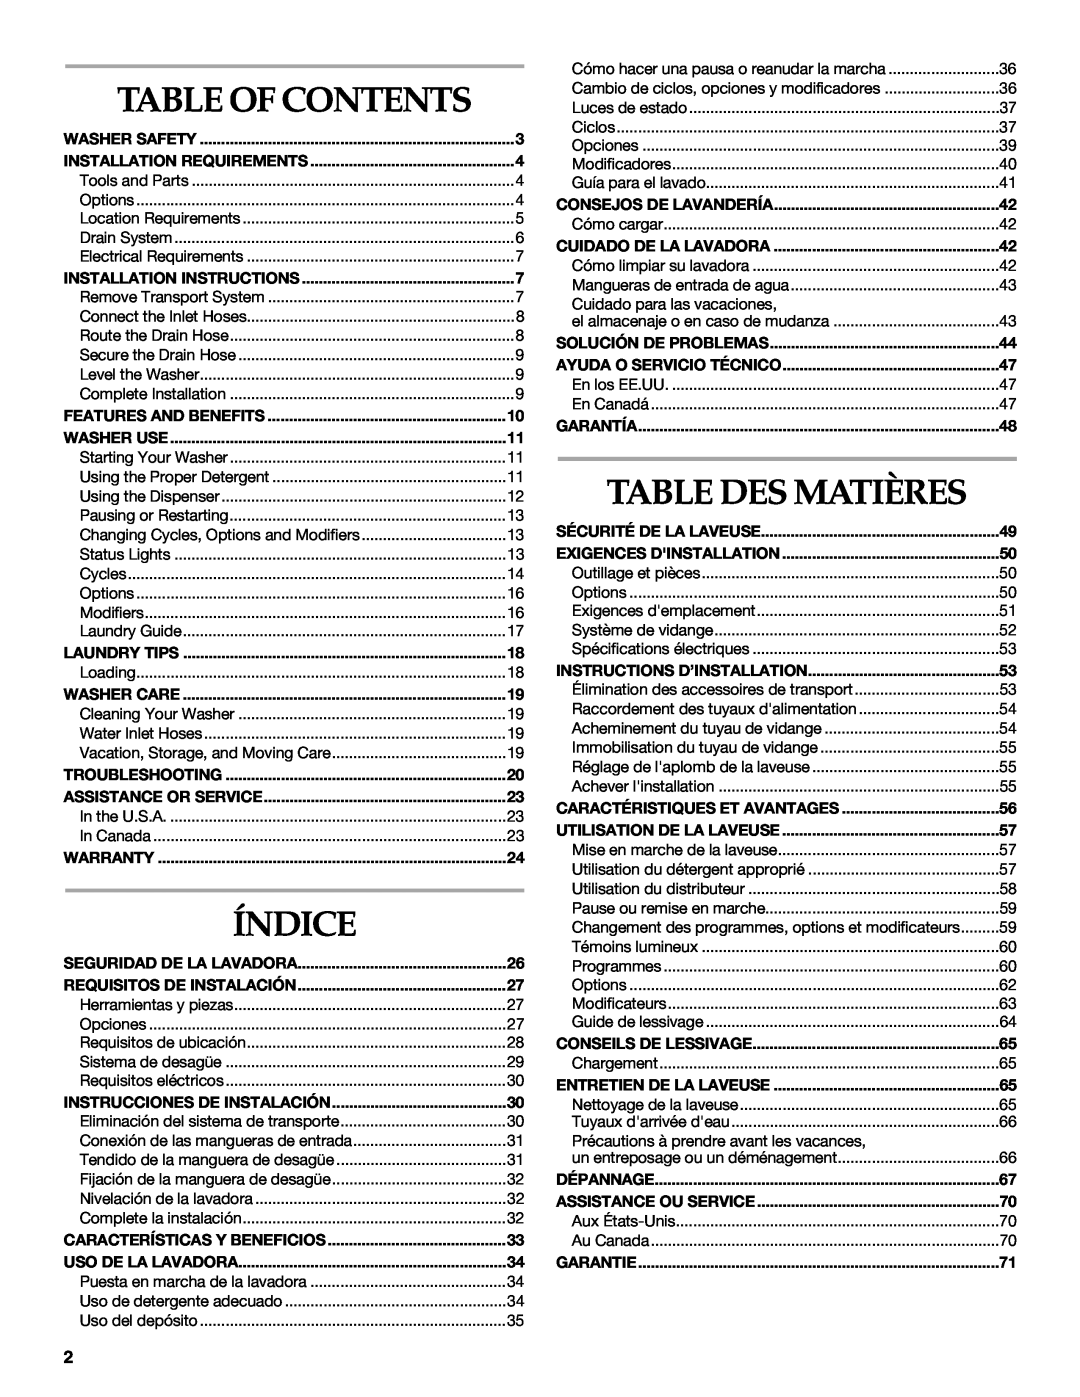 Maytag 8182969 manual Table Des Matières, Índice, Table Of Contents 